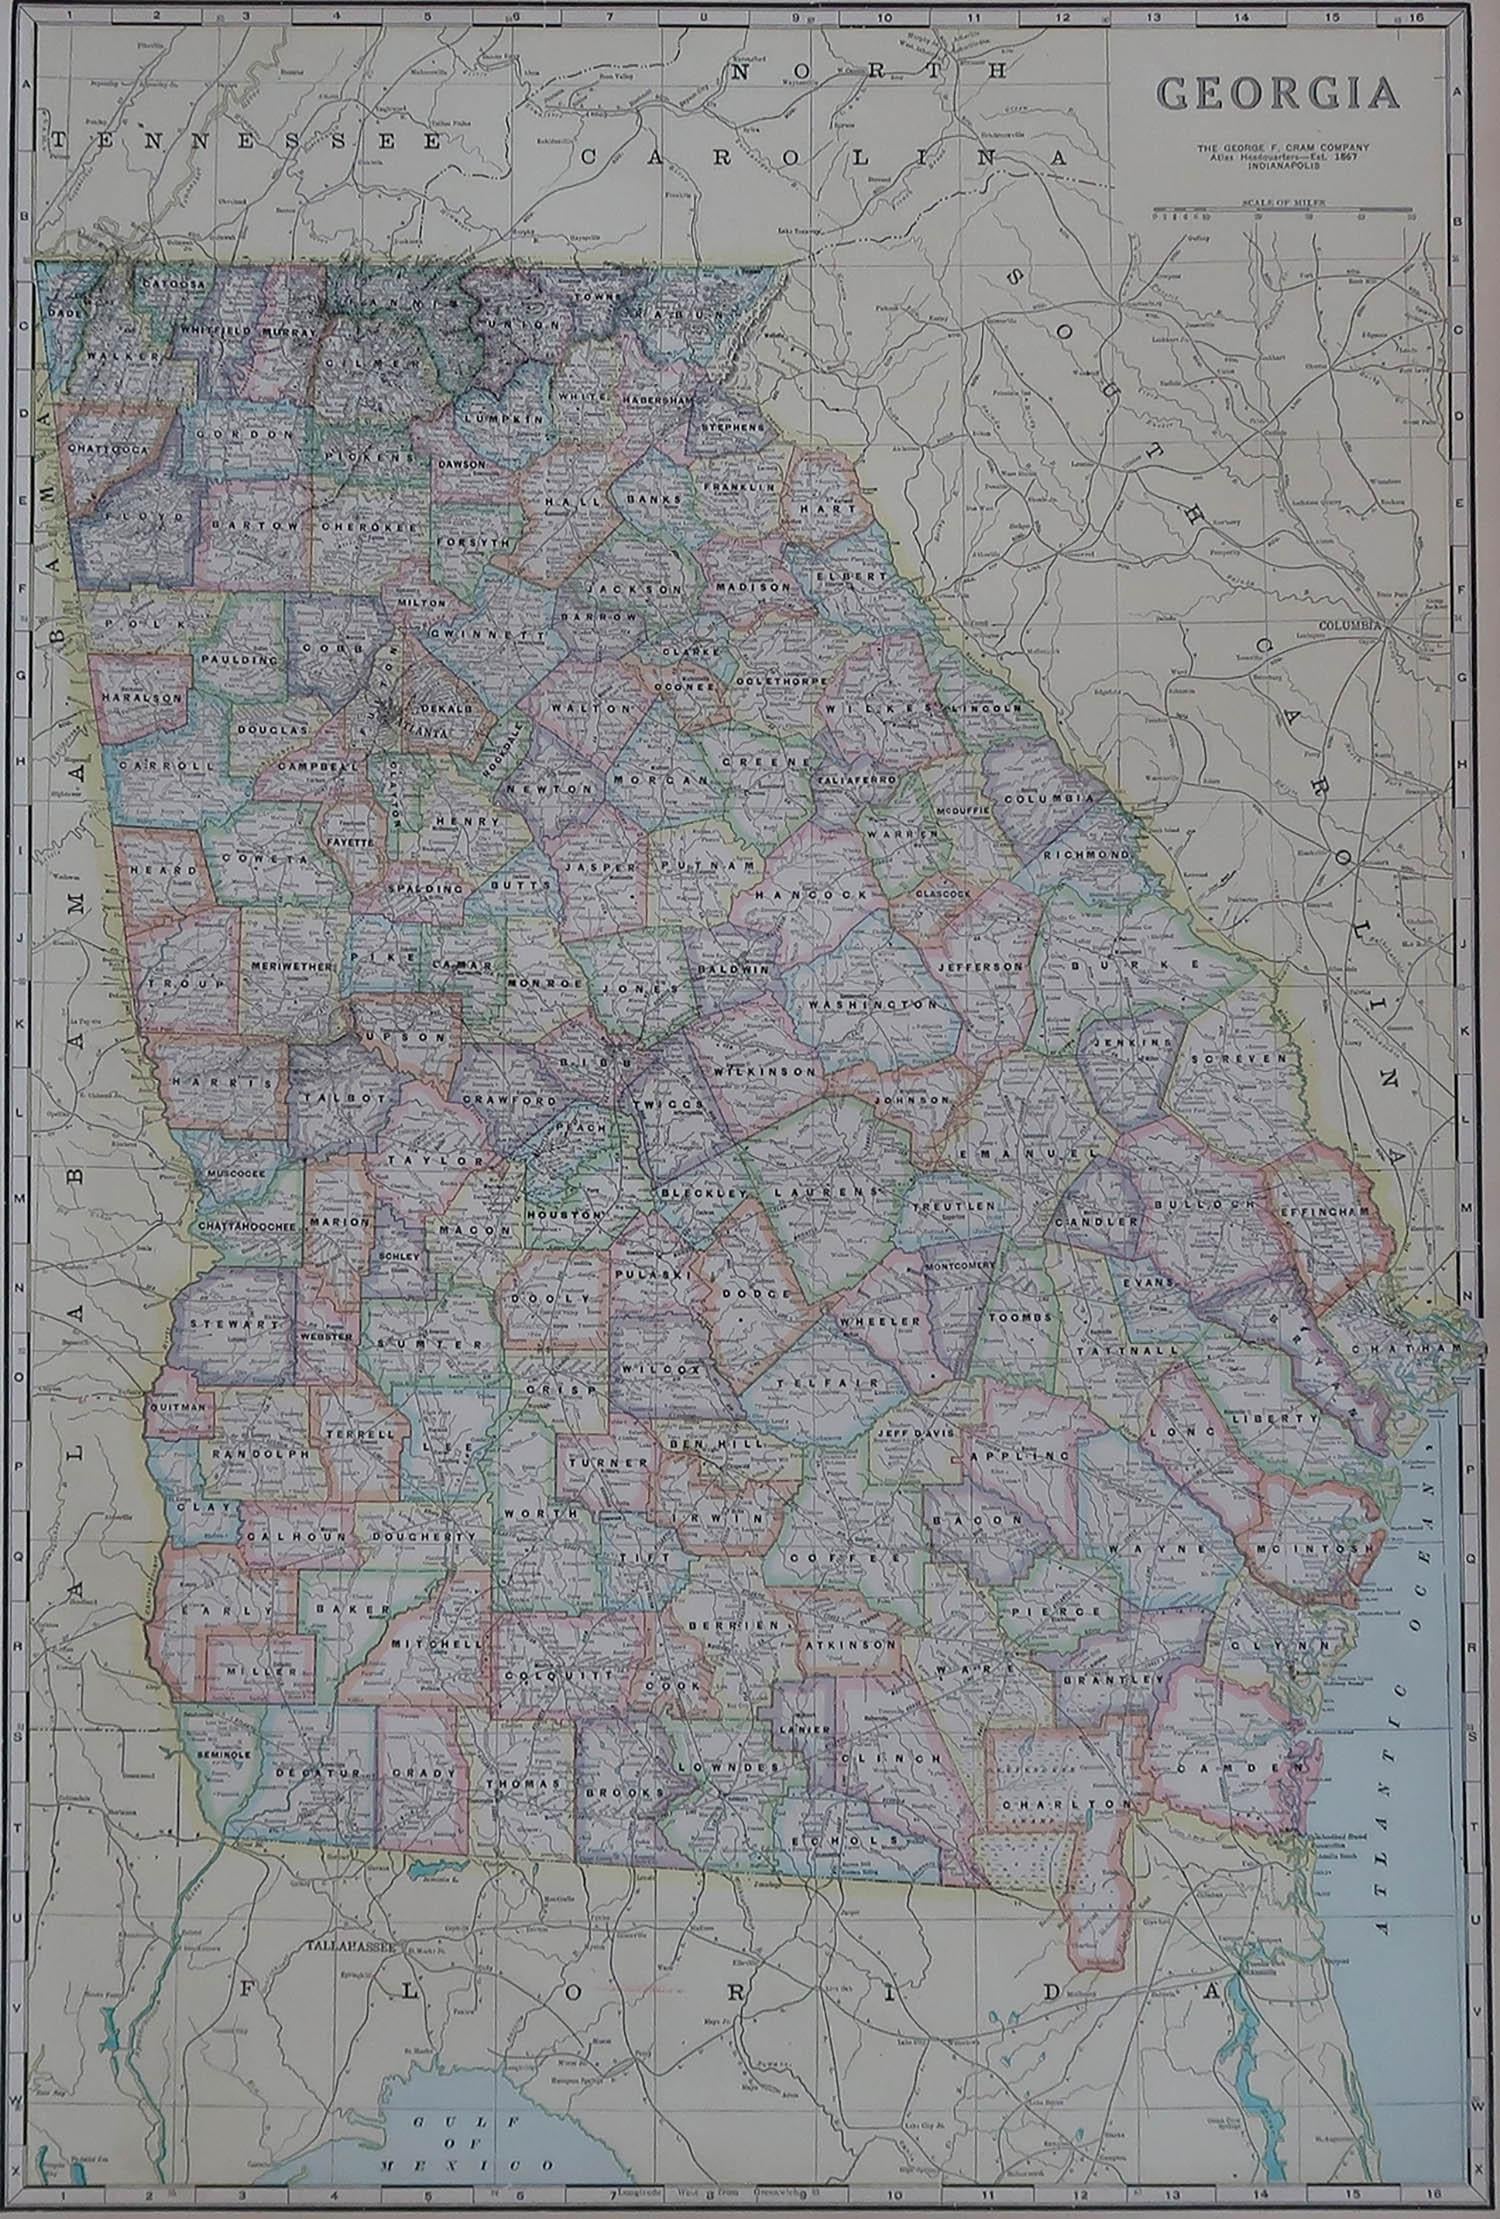 Fabulous map of Georgia

Original color

Engraved and printed by the George F. Cram Company, Indianapolis.

Published, circa 1900

Unframed


 